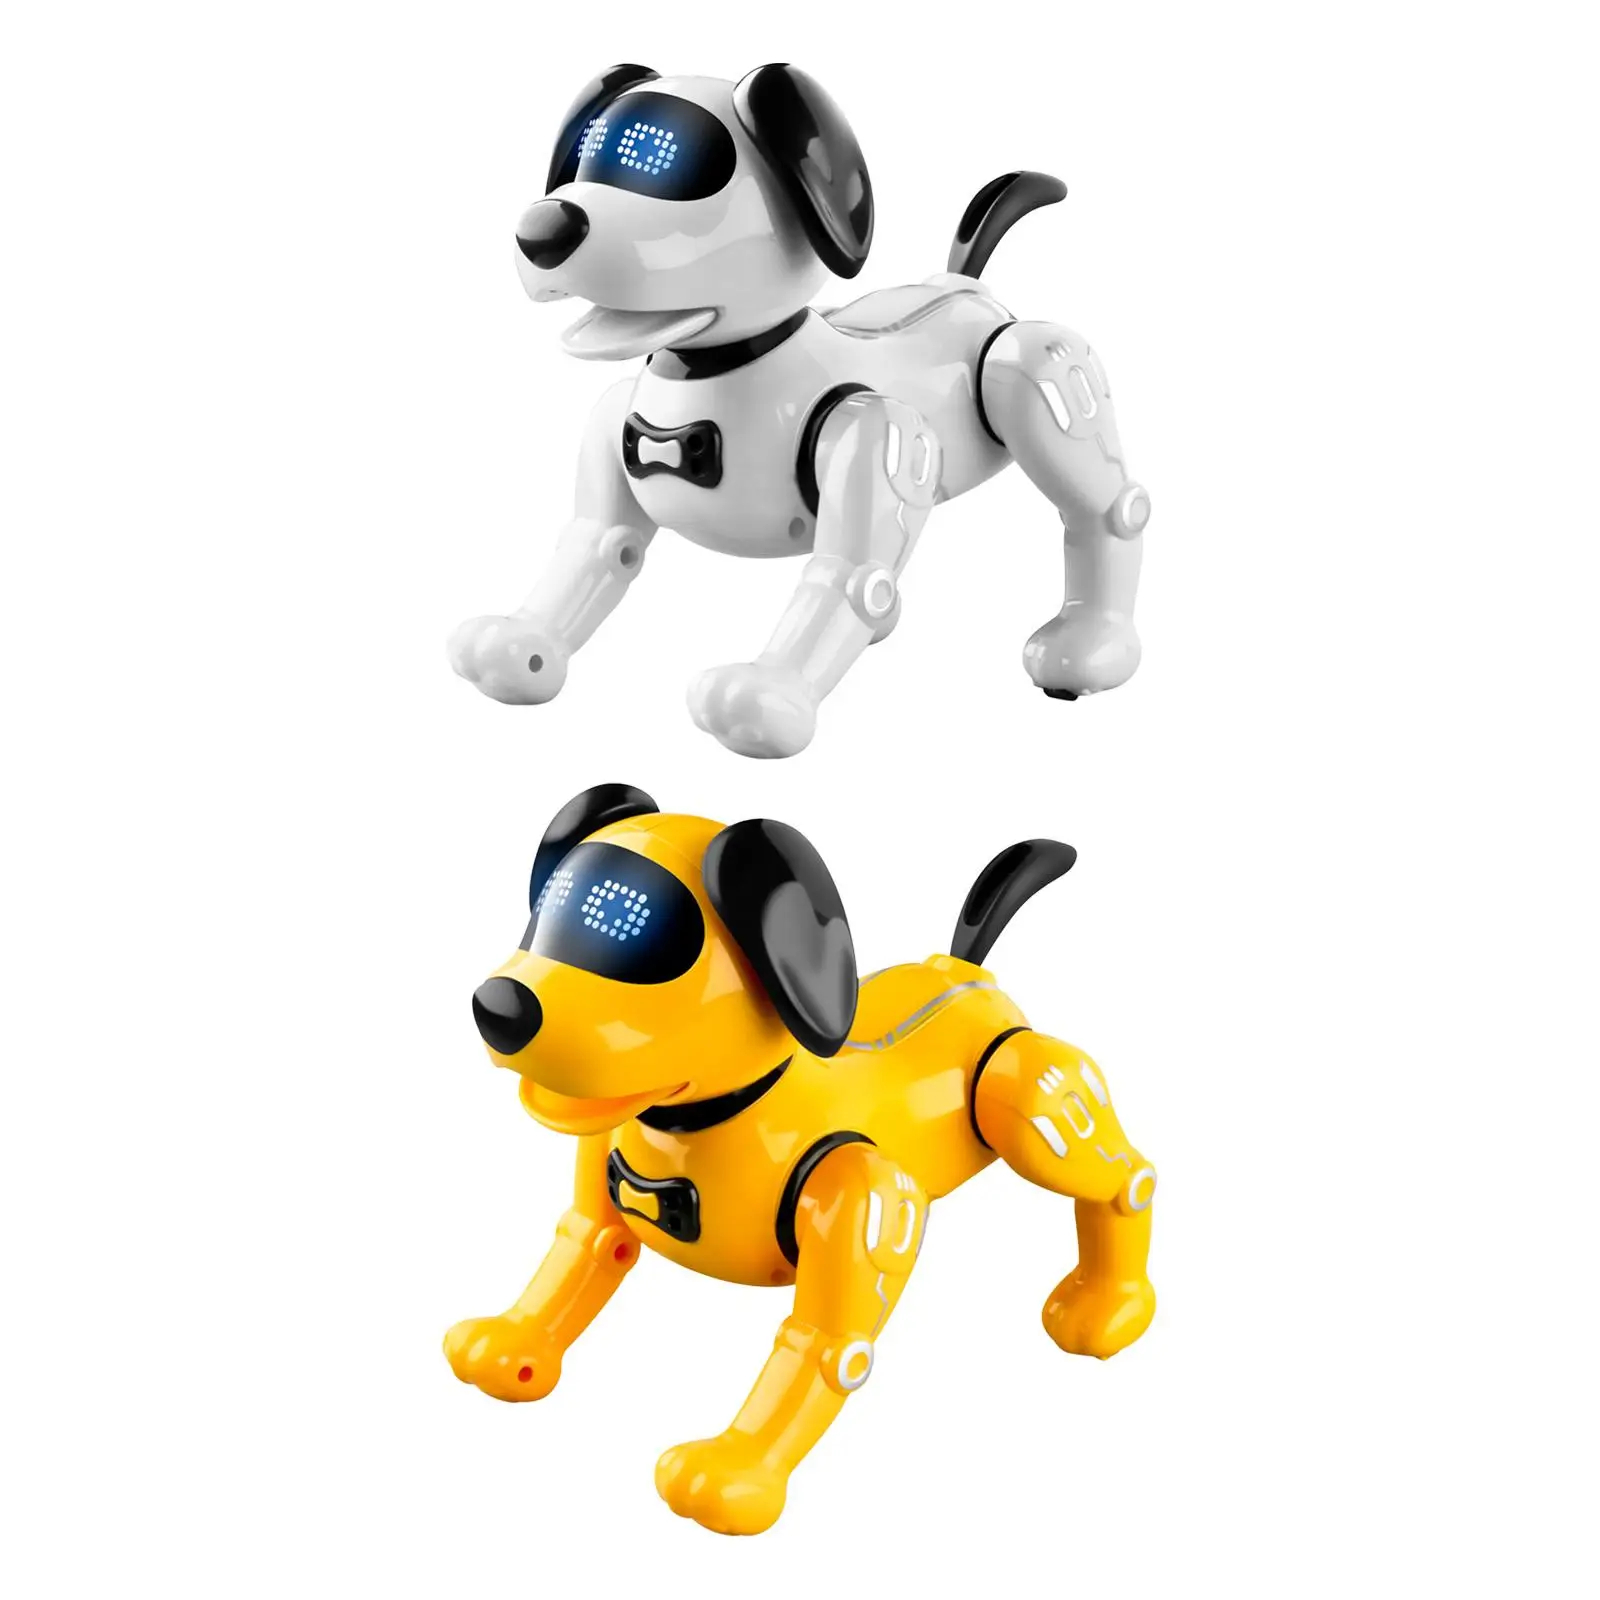 Remote Control Robot Dog Handstand Push up RC Robot Dog interactive Robotic Pet for Kids Boys and Girls Age 5 6 7 8 9 10